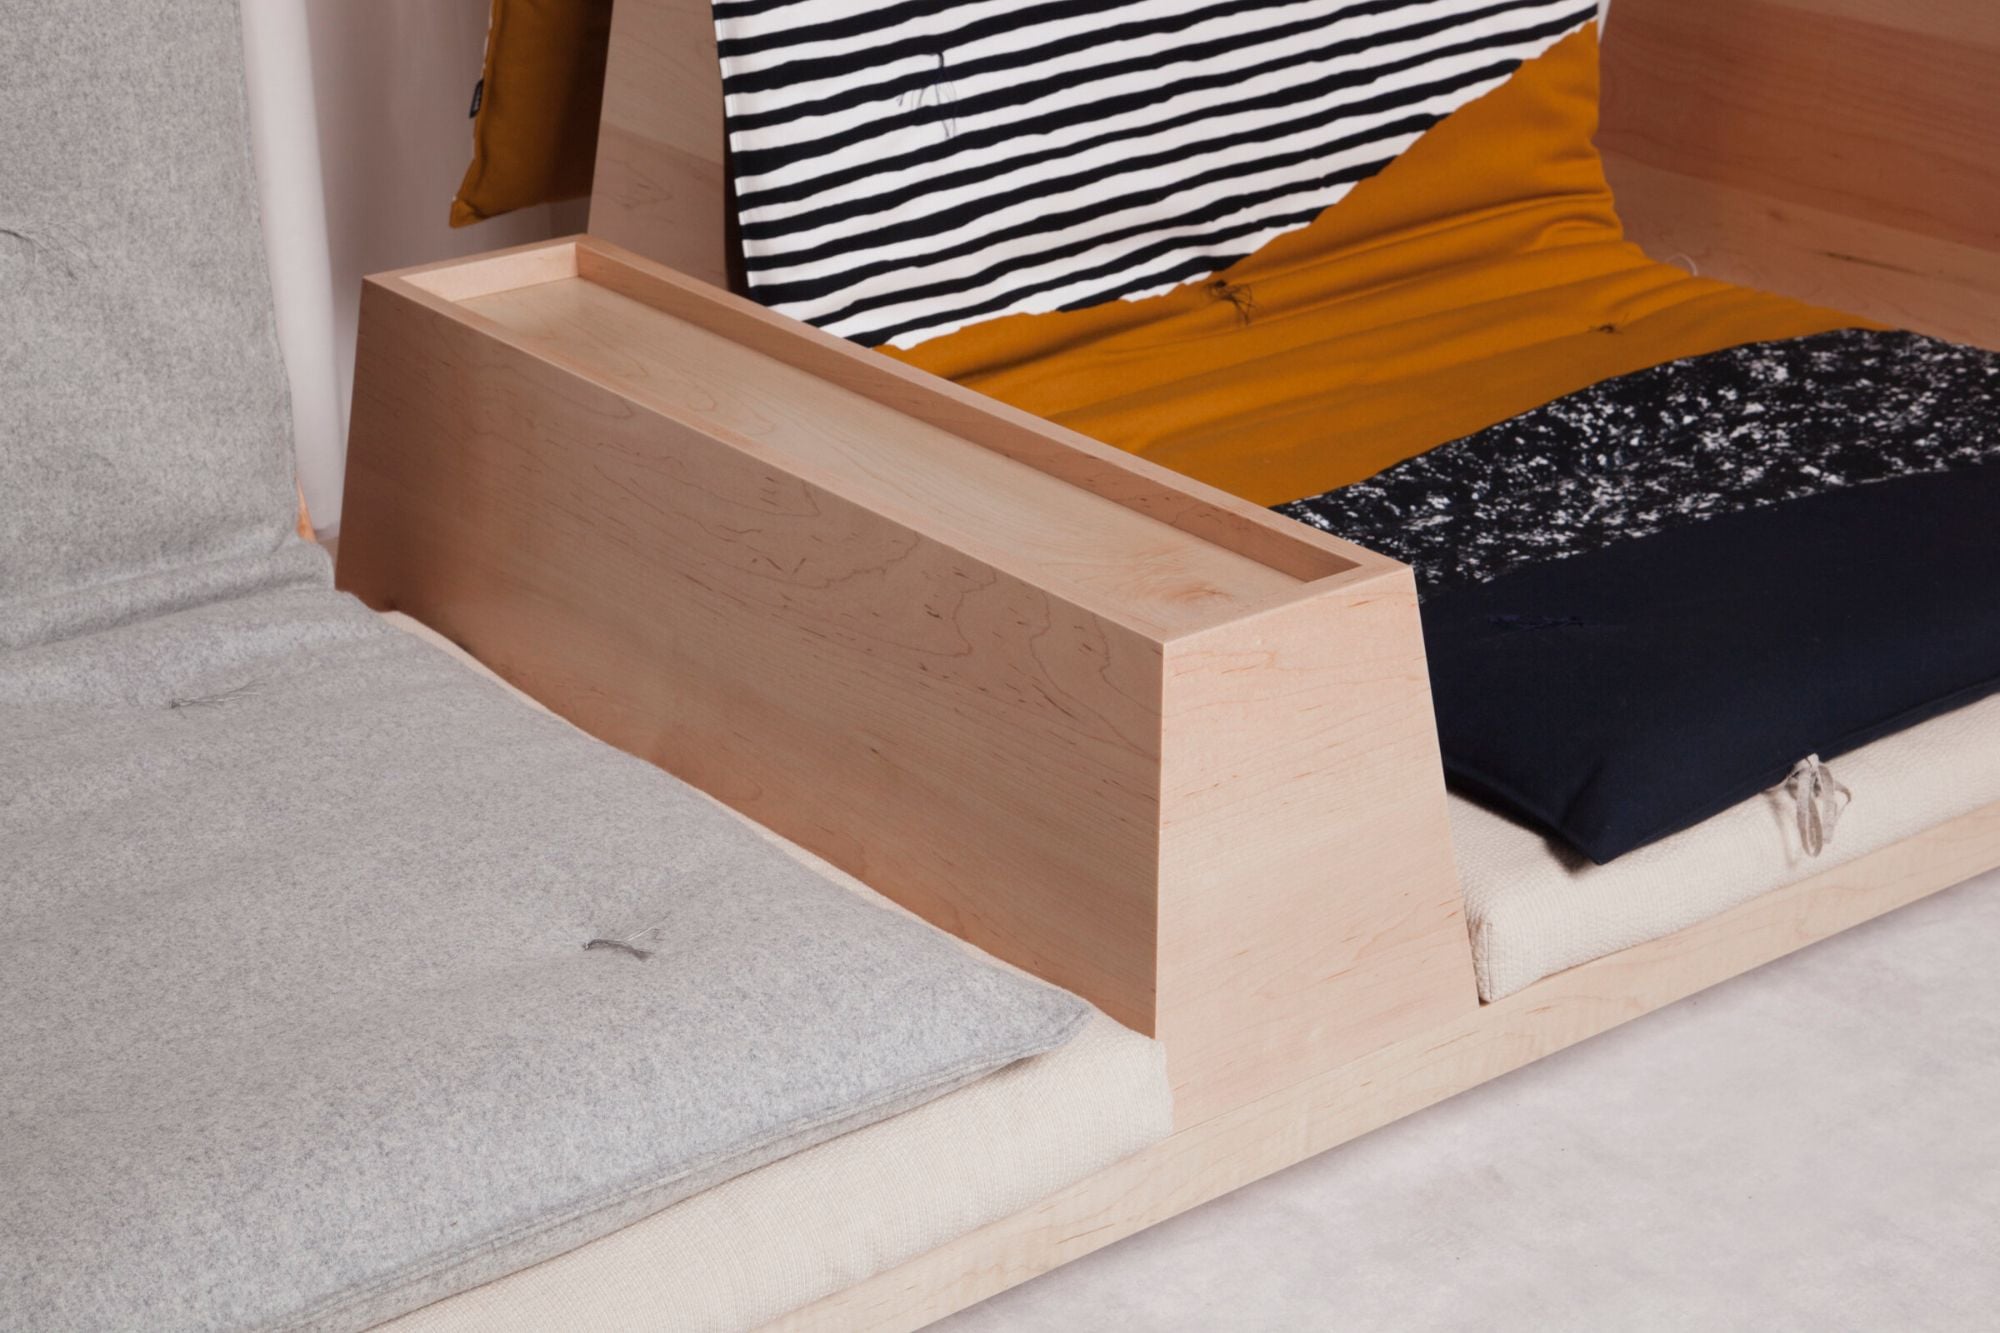 Close-up of the Zabuton's wooden and futon elements, with a handy low-table partition installed in the center. 